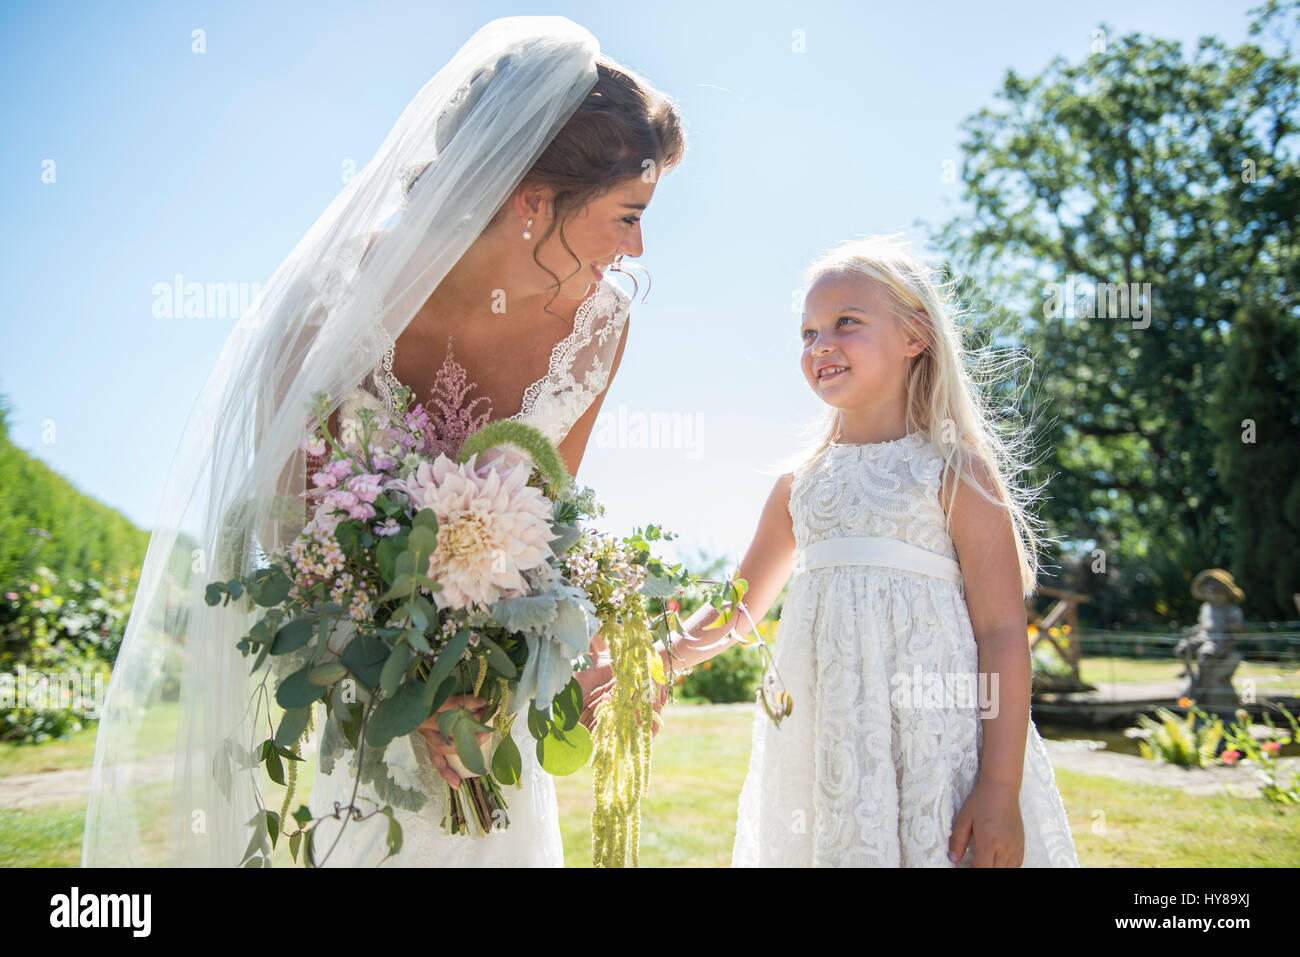 A bride with her young bridesmaid on her wedding day Stock Photo